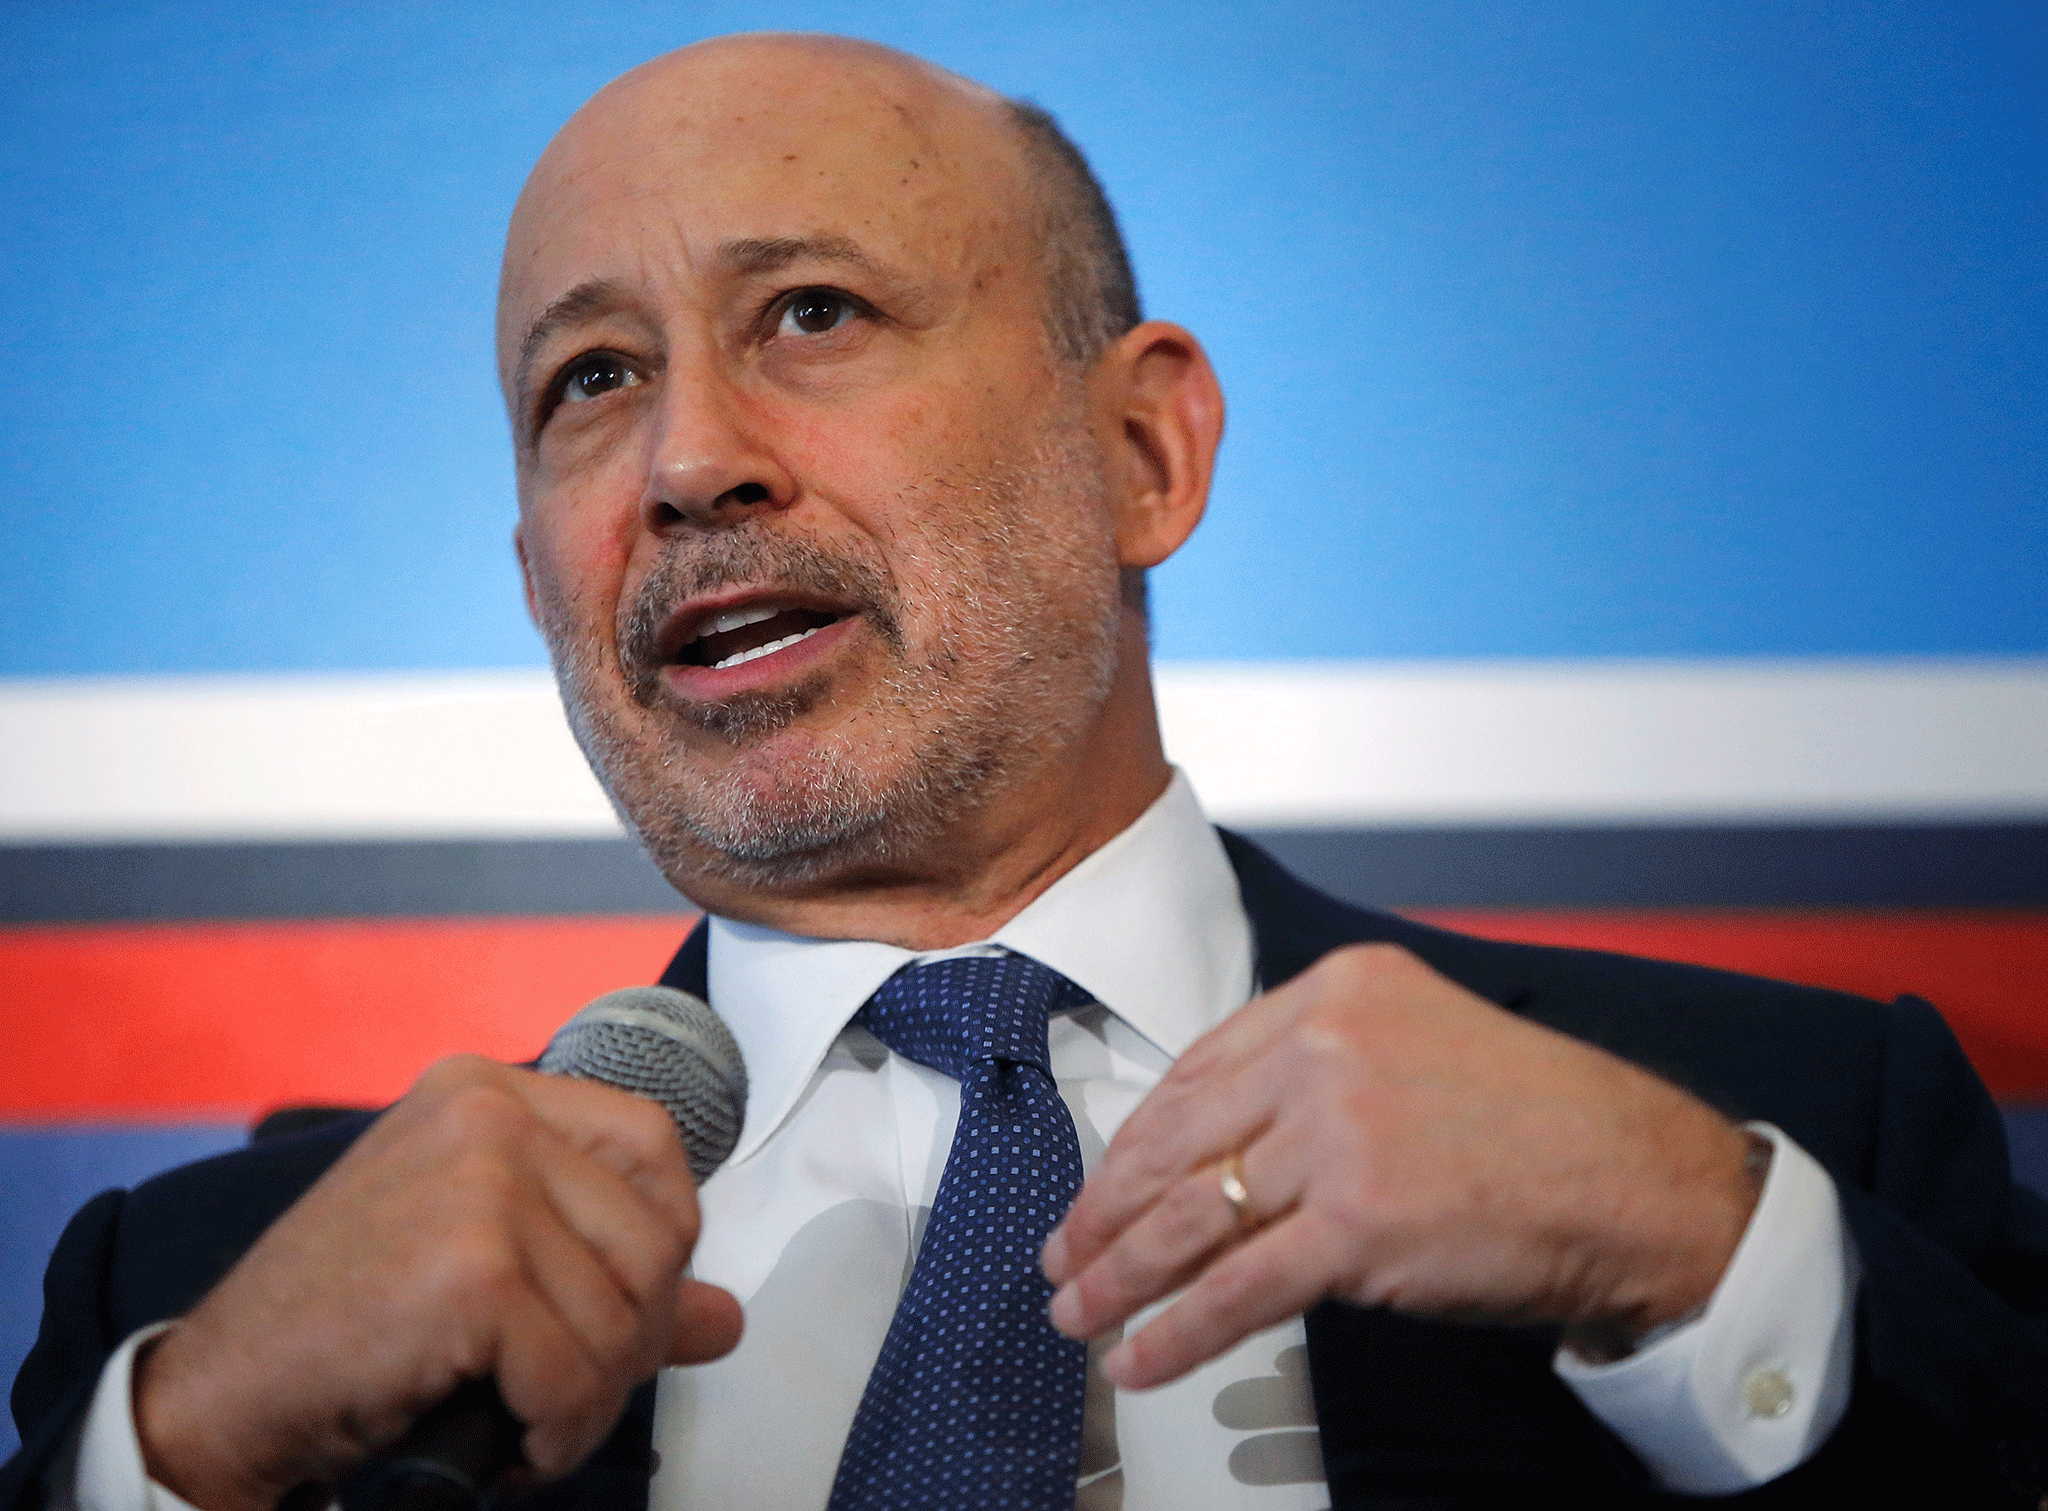 New York 'already a gainer' from Brexit says Goldman CEO Blankfein